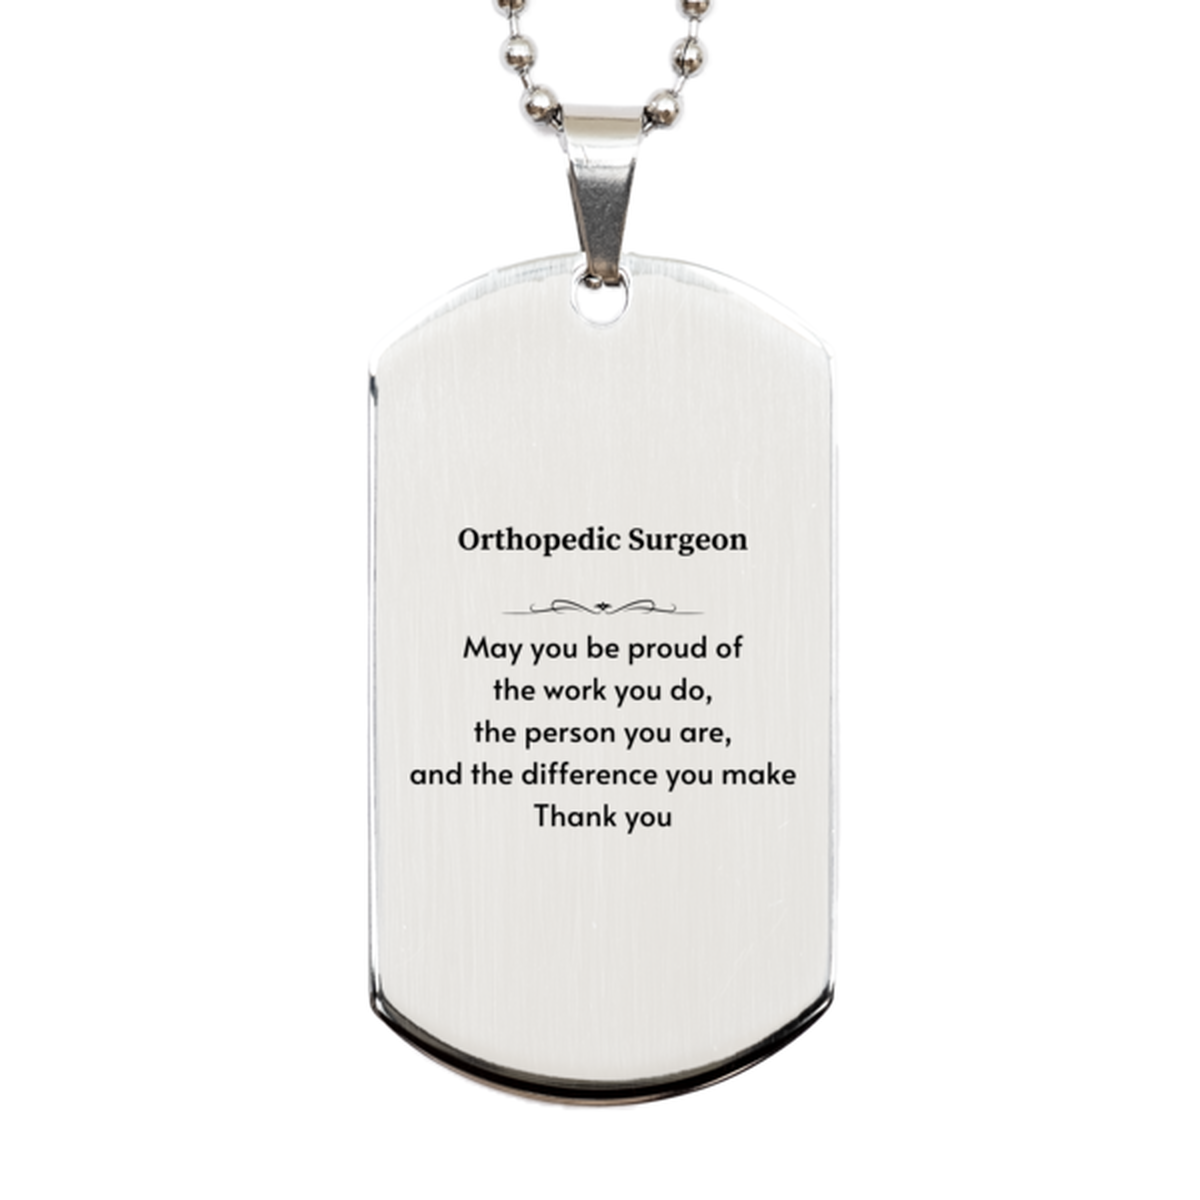 Heartwarming Silver Dog Tag Retirement Coworkers Gifts for Orthopedic Surgeon, Orthopedic Surgeon May You be proud of the work you do, the person you are Gifts for Boss Men Women Friends